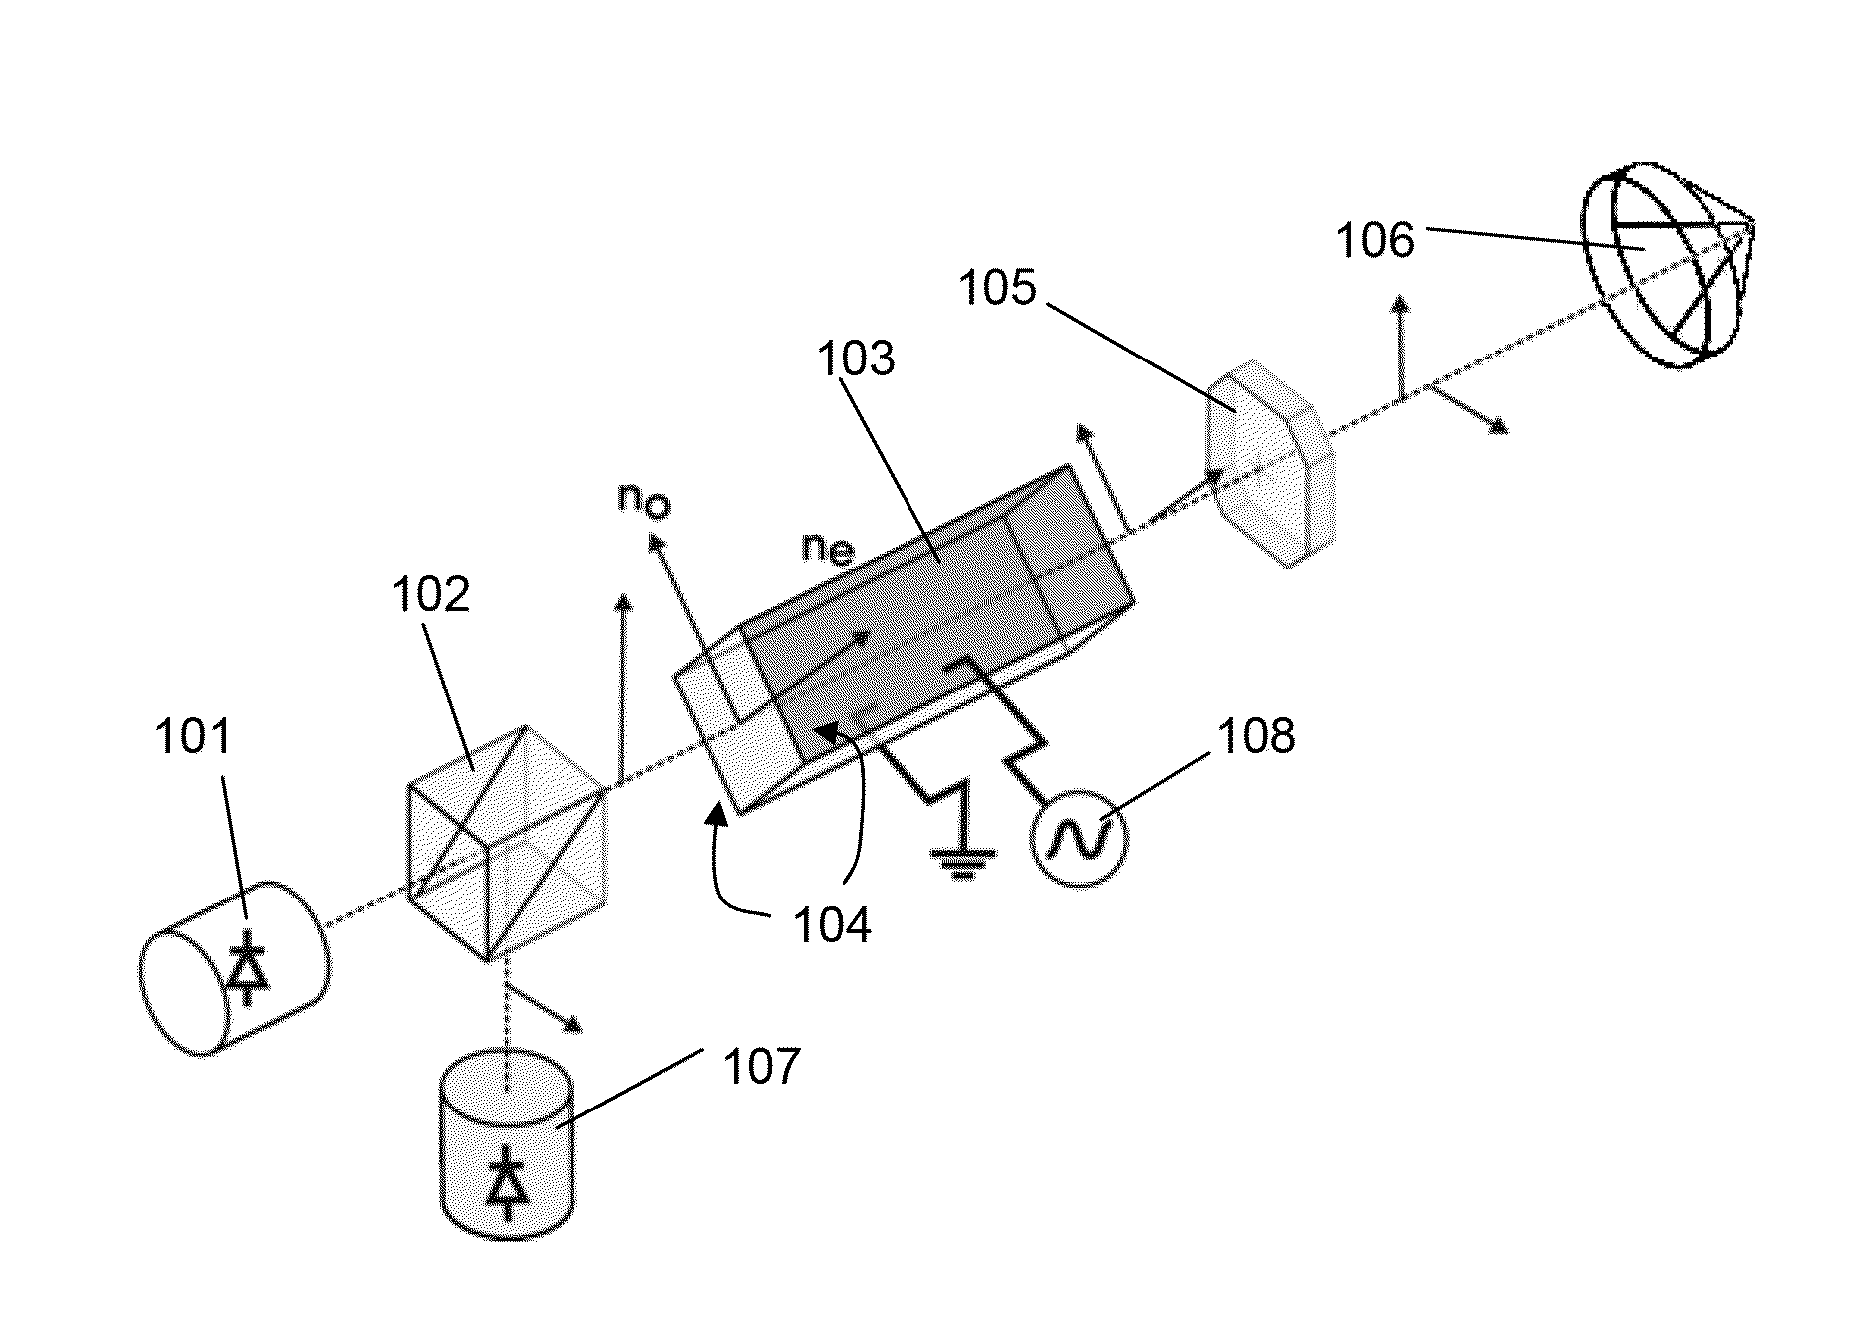 Electro-optic distance-measuring device